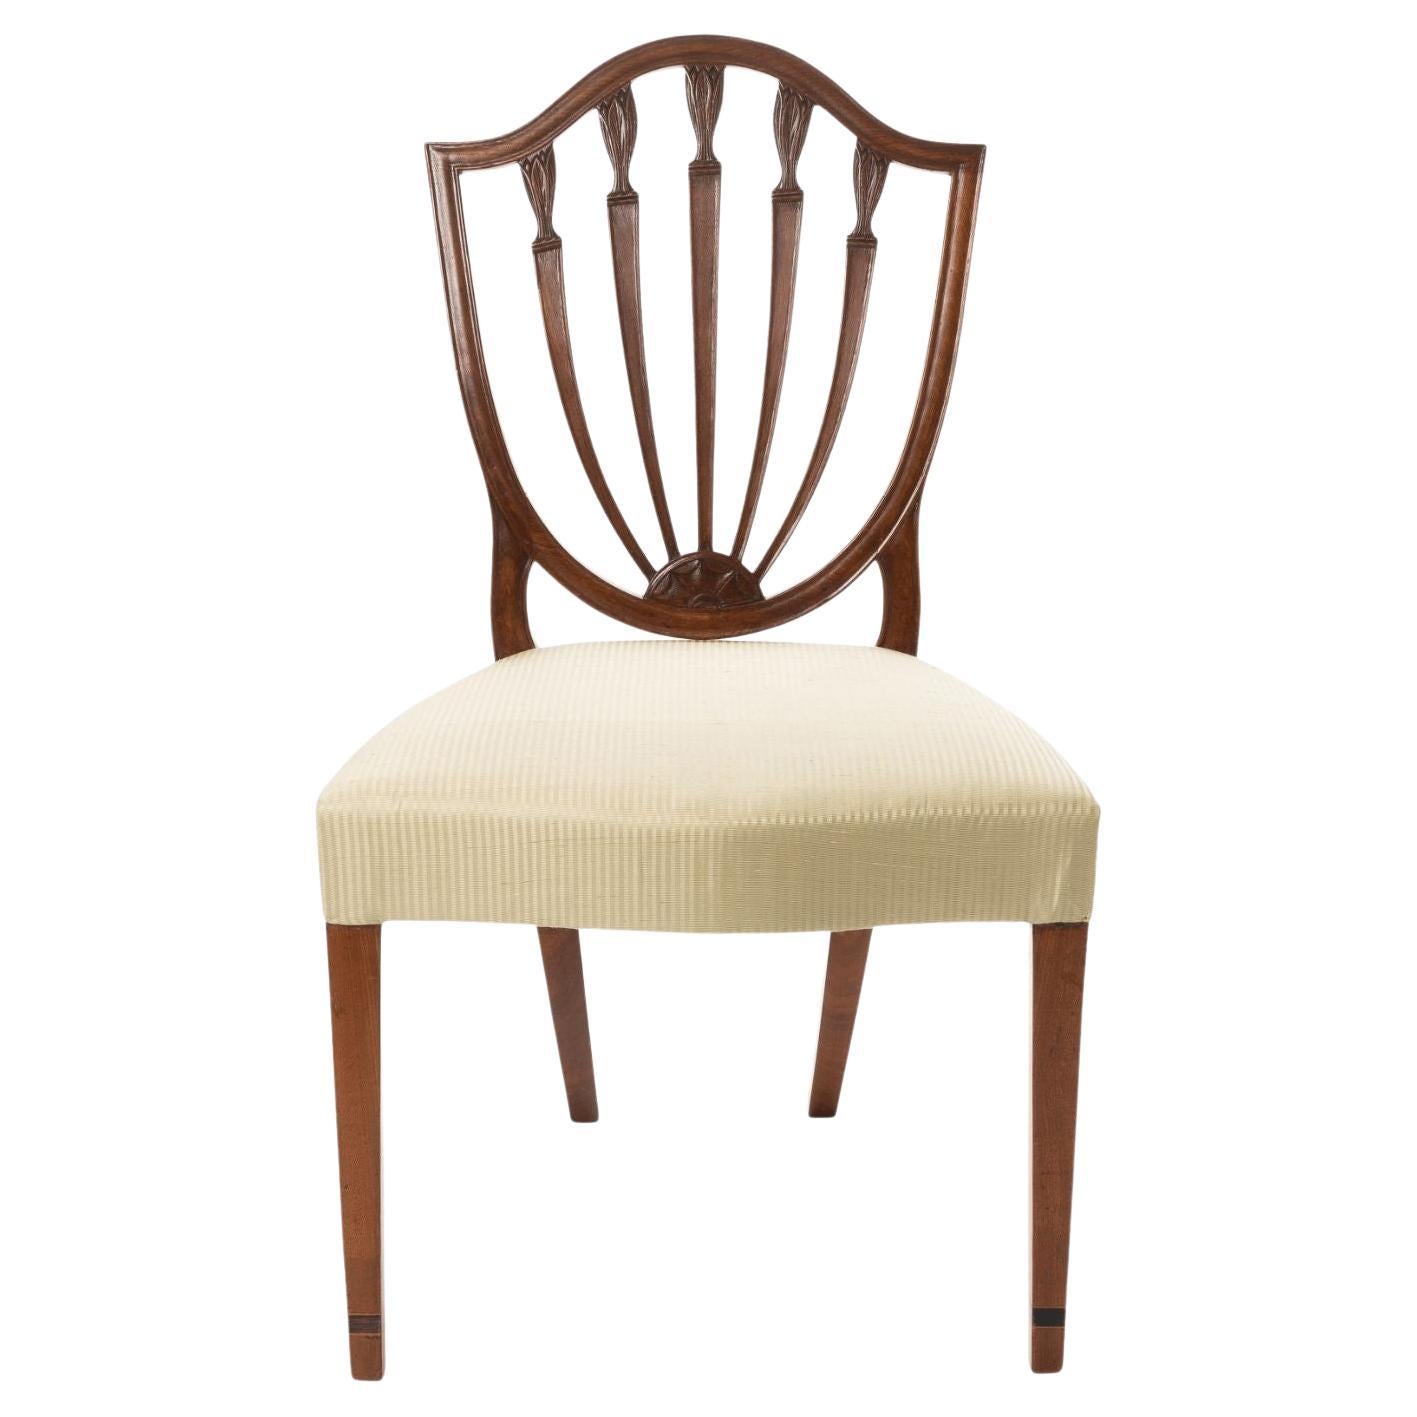 American Mahogany Shield Back Side Chair with Serpentine Seat, c. 1790